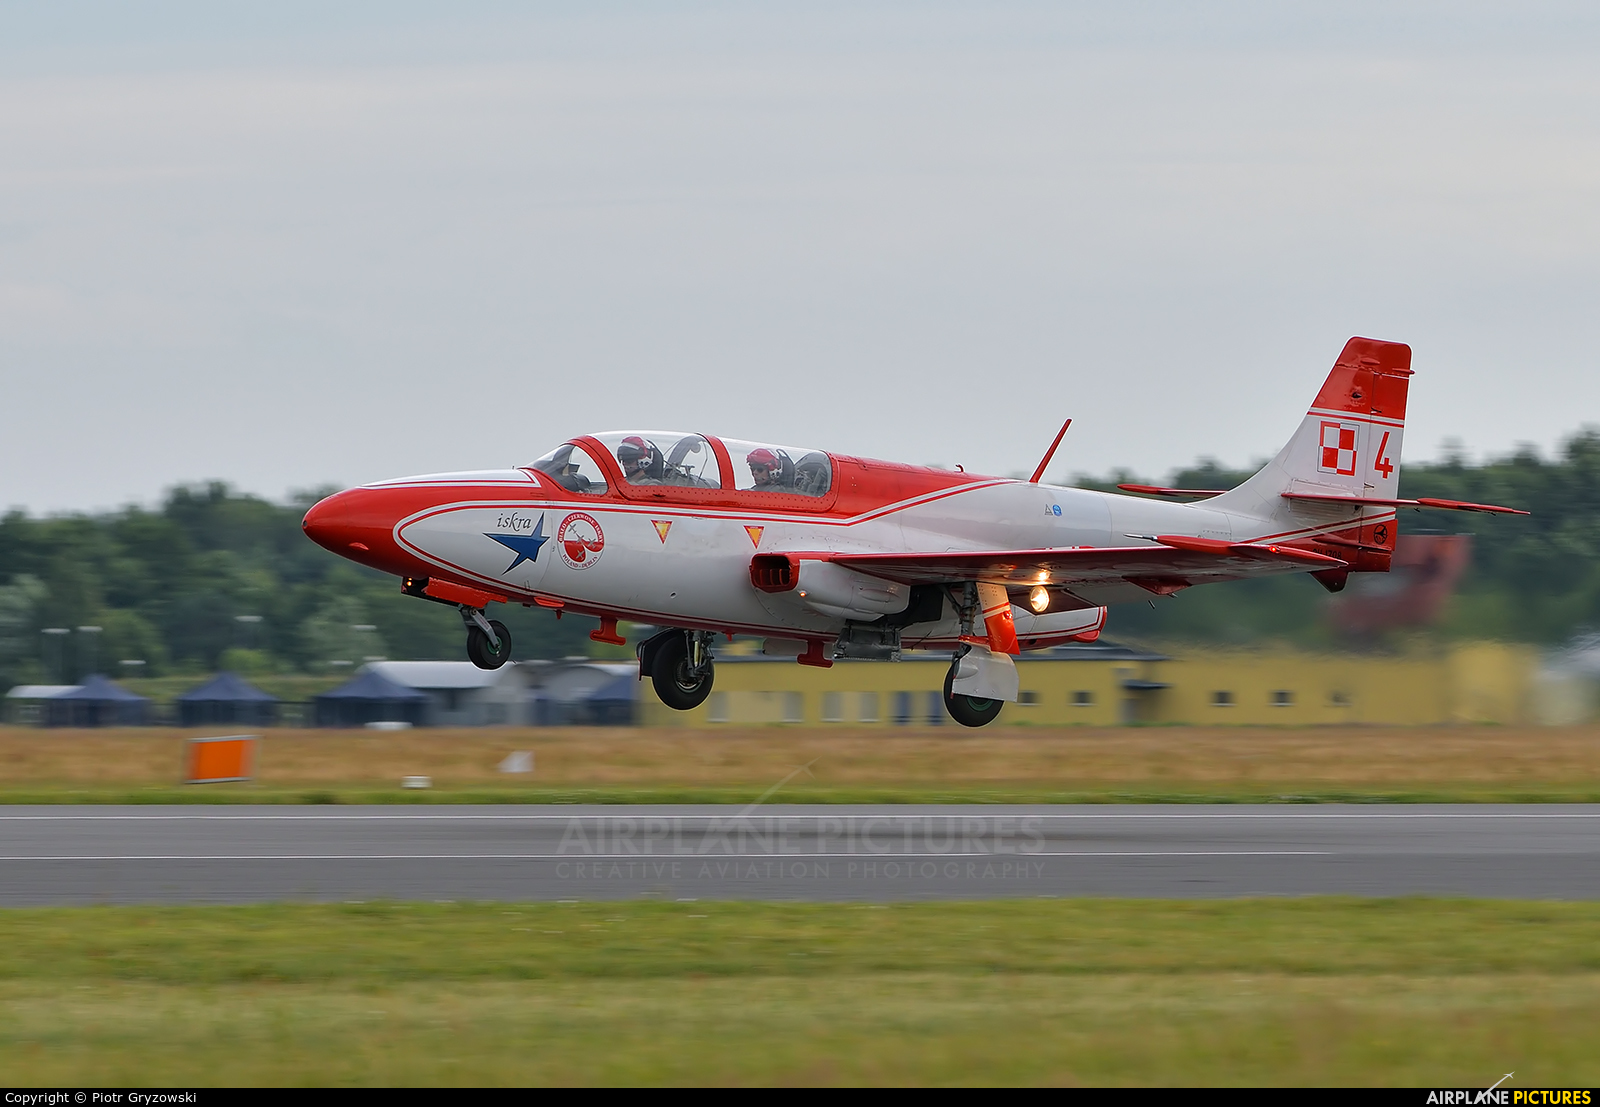 Poland - Air Force: White & Red Iskras 2004 aircraft at Dęblin